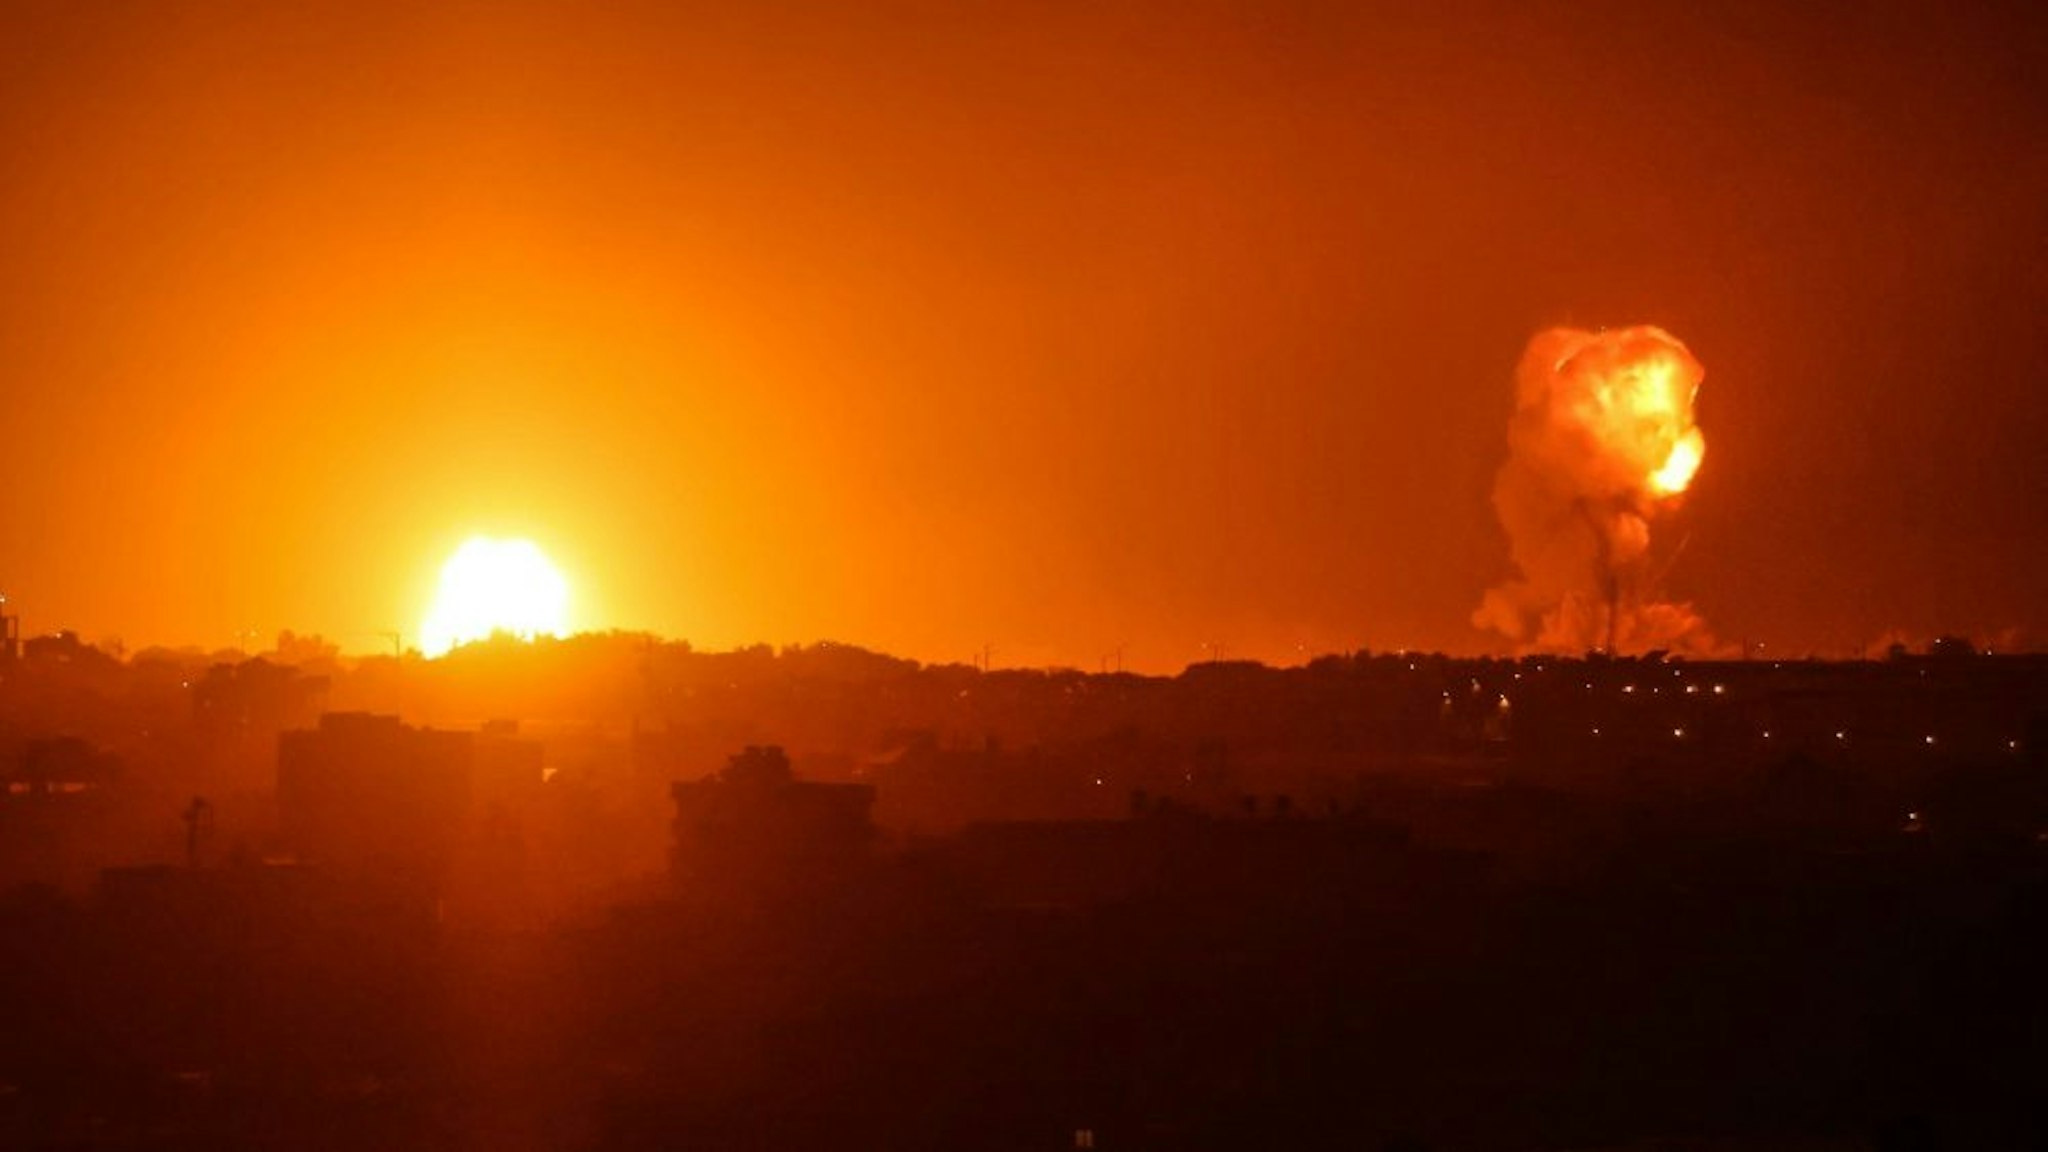 Fire billows from Israeli air strikes in Rafah, in the southern Gaza Strip, on May 11, 2021. - Israel launched deadly air strikes on Gaza on May 10 in response to a barrage of rockets fired by Hamas and other Palestinian militants, amid spiralling violence sparked by unrest at Jerusalem's Al-Aqsa Mosque compound.